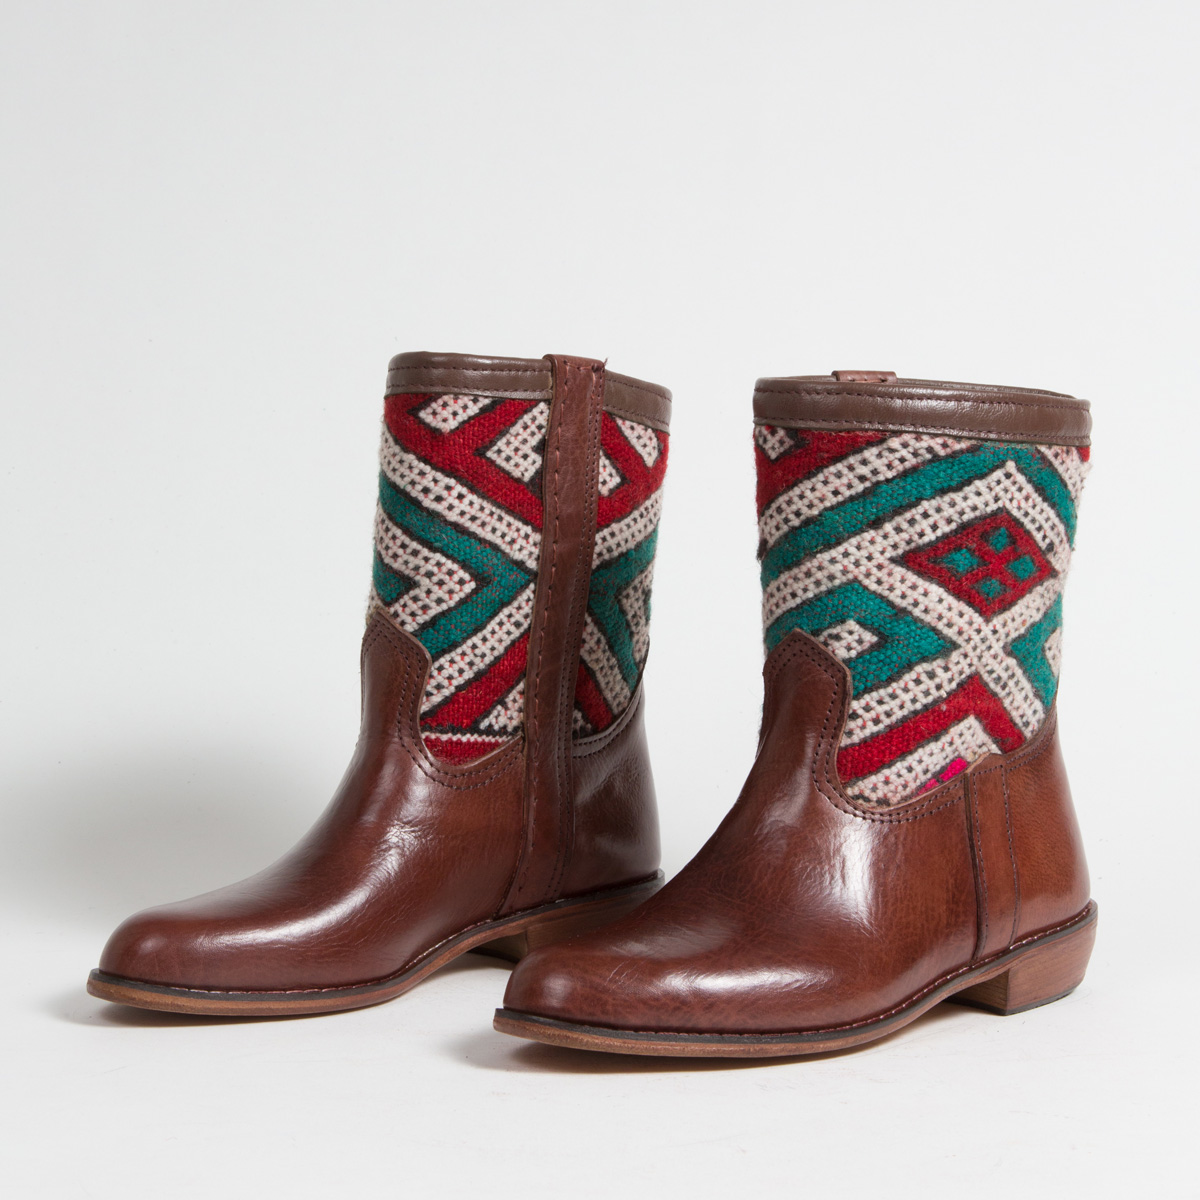 Bottines Kilim cuir mababouche artisanales (Réf. CB1-37)